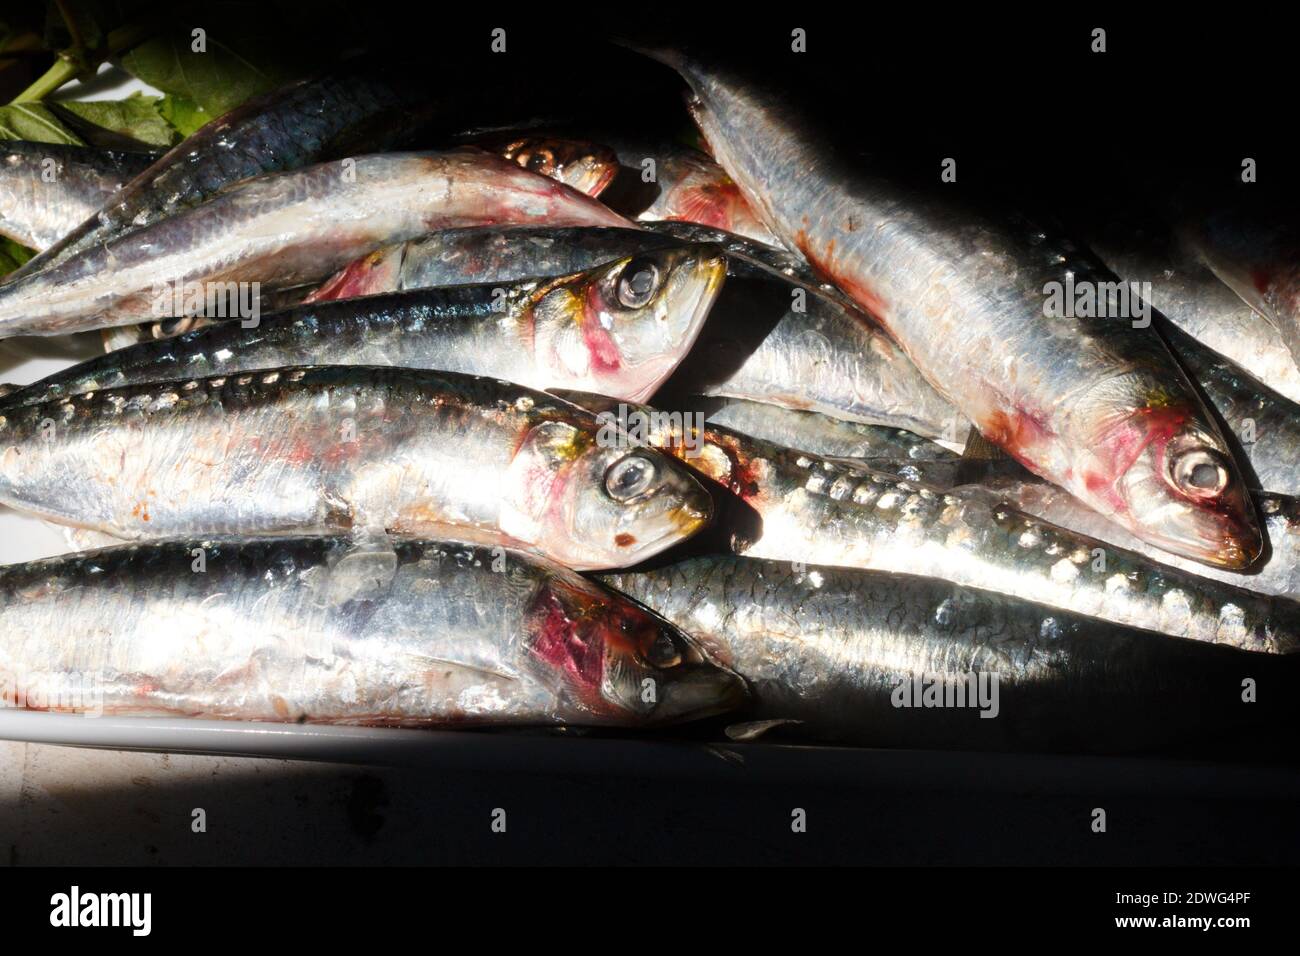 salty and fresh sardines in natural light Stock Photo